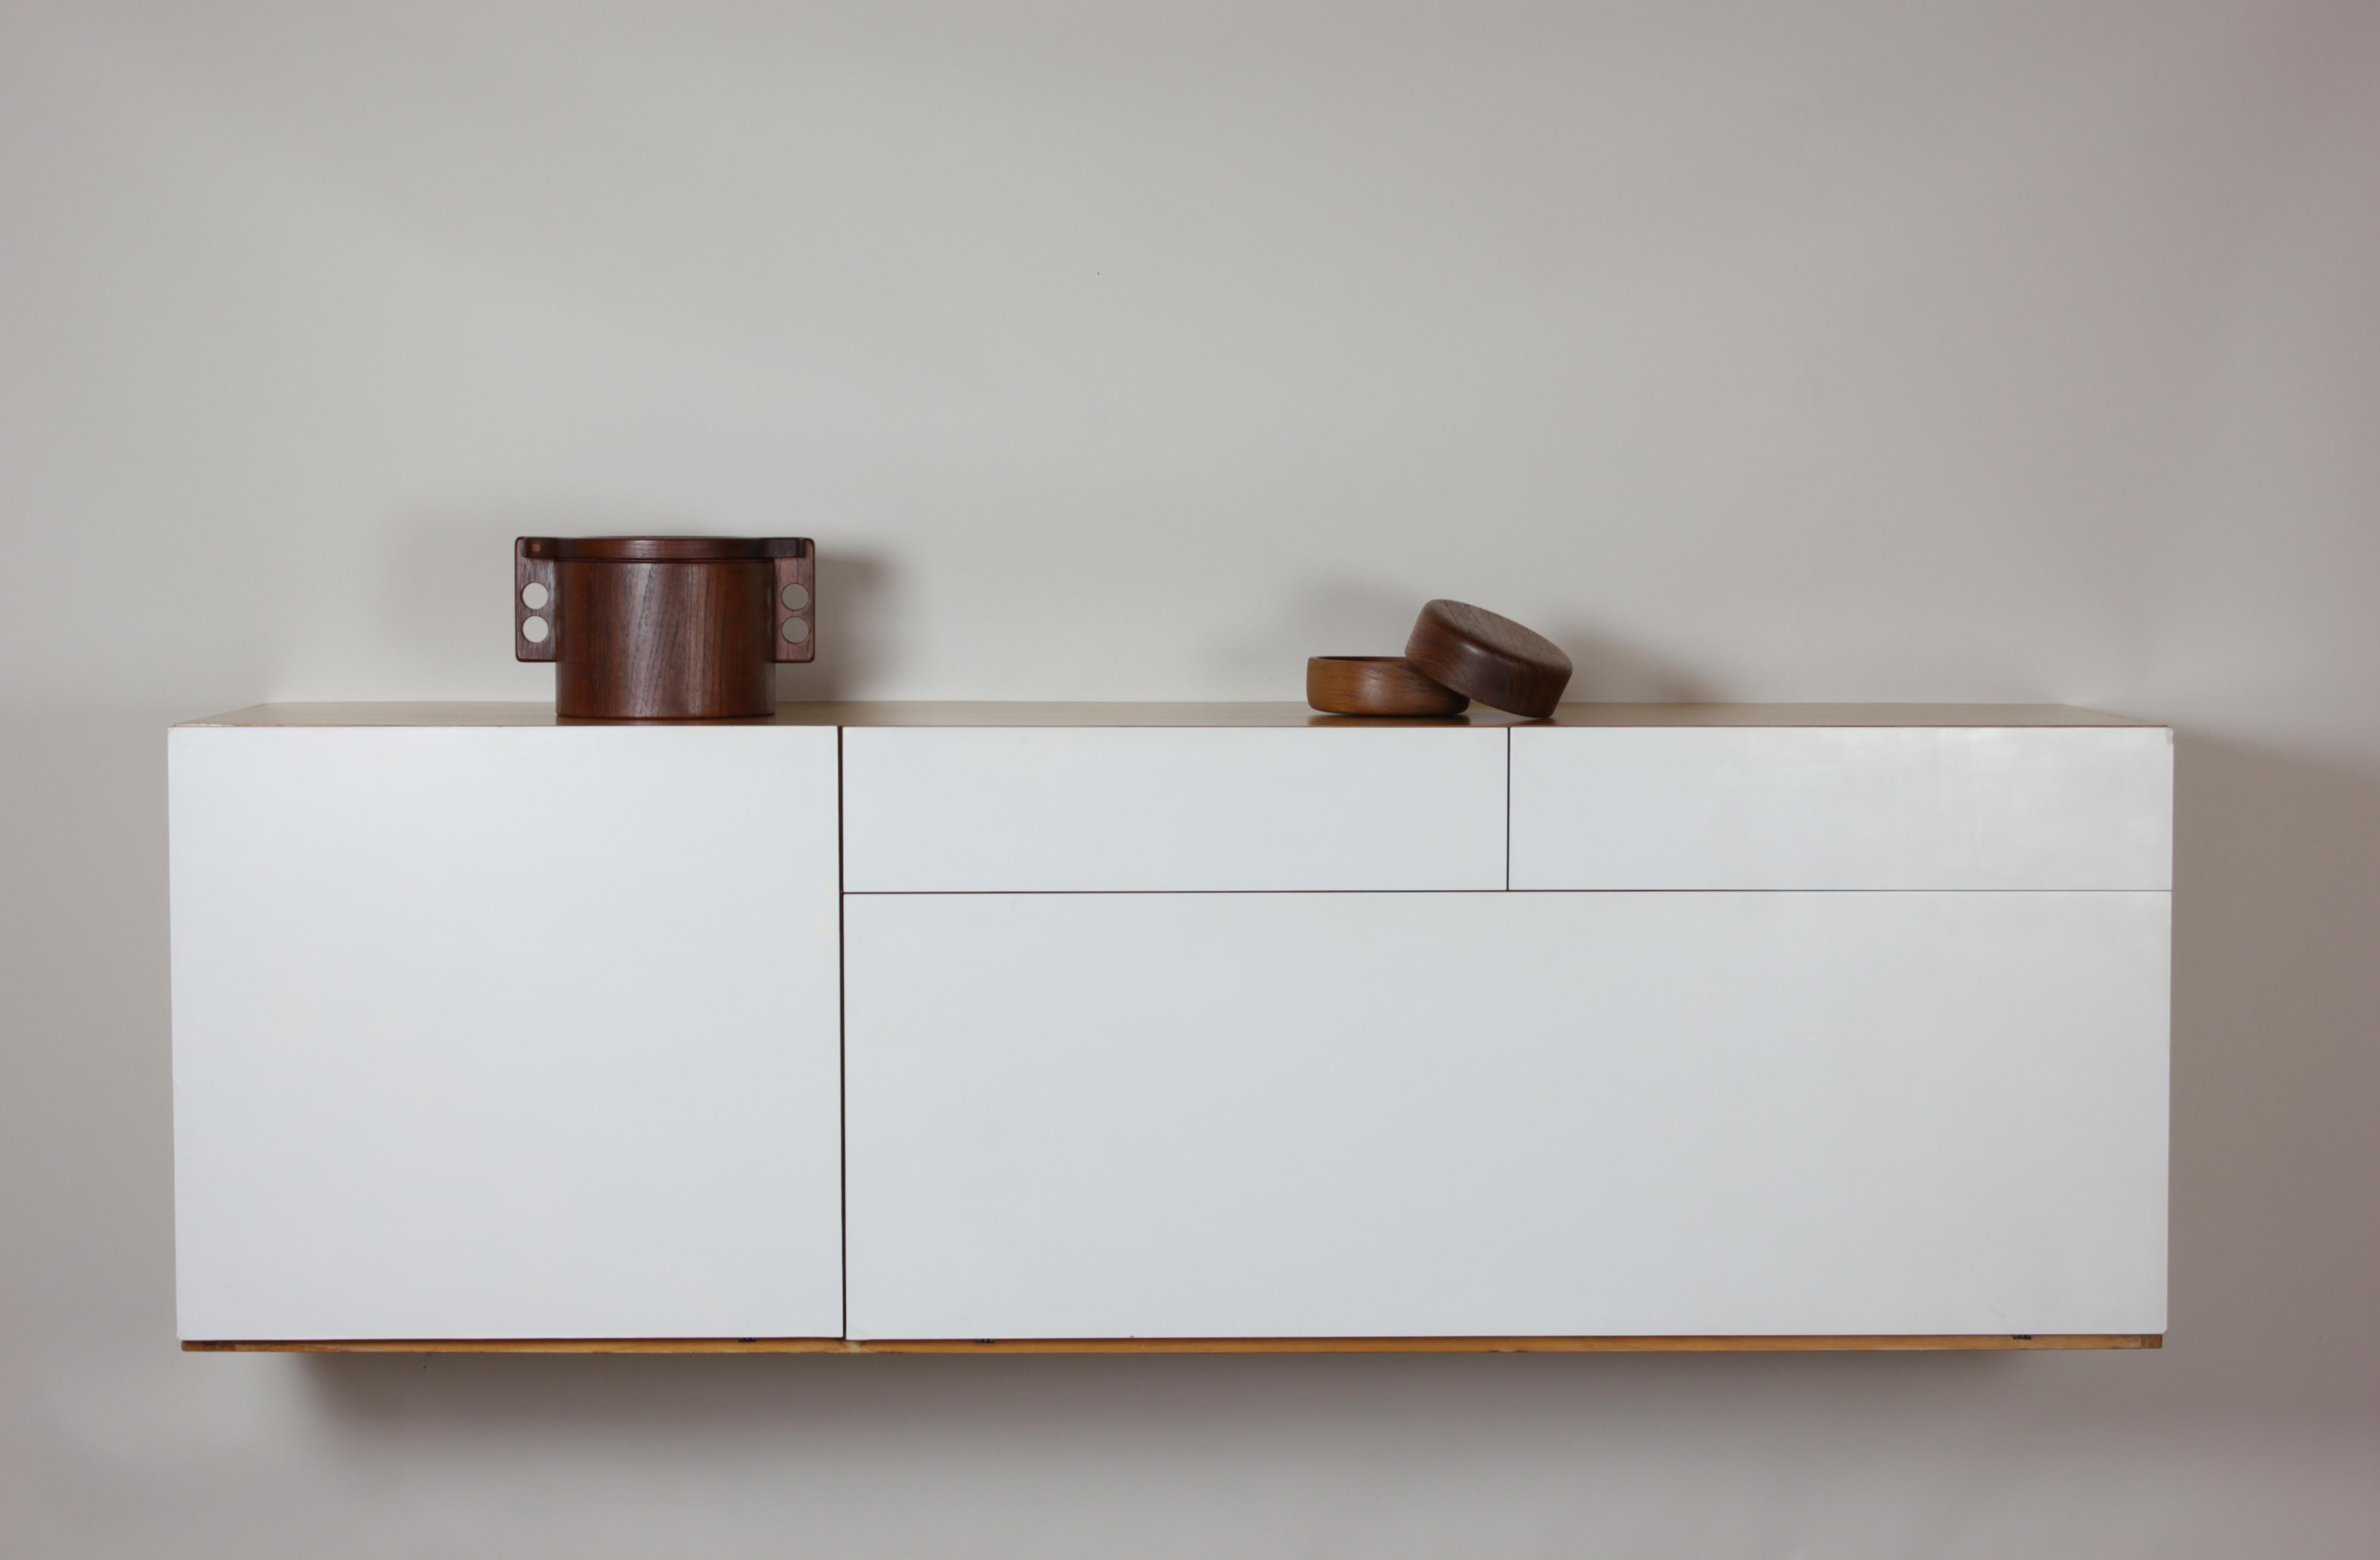 The 1950s wall mounted sideboard designed by the visionary French duo Antoine Philippon and Jacqueline Lecoq is a striking example of mid-century modern design innovation. This exquisite piece seamlessly marries form and function, epitomizing the